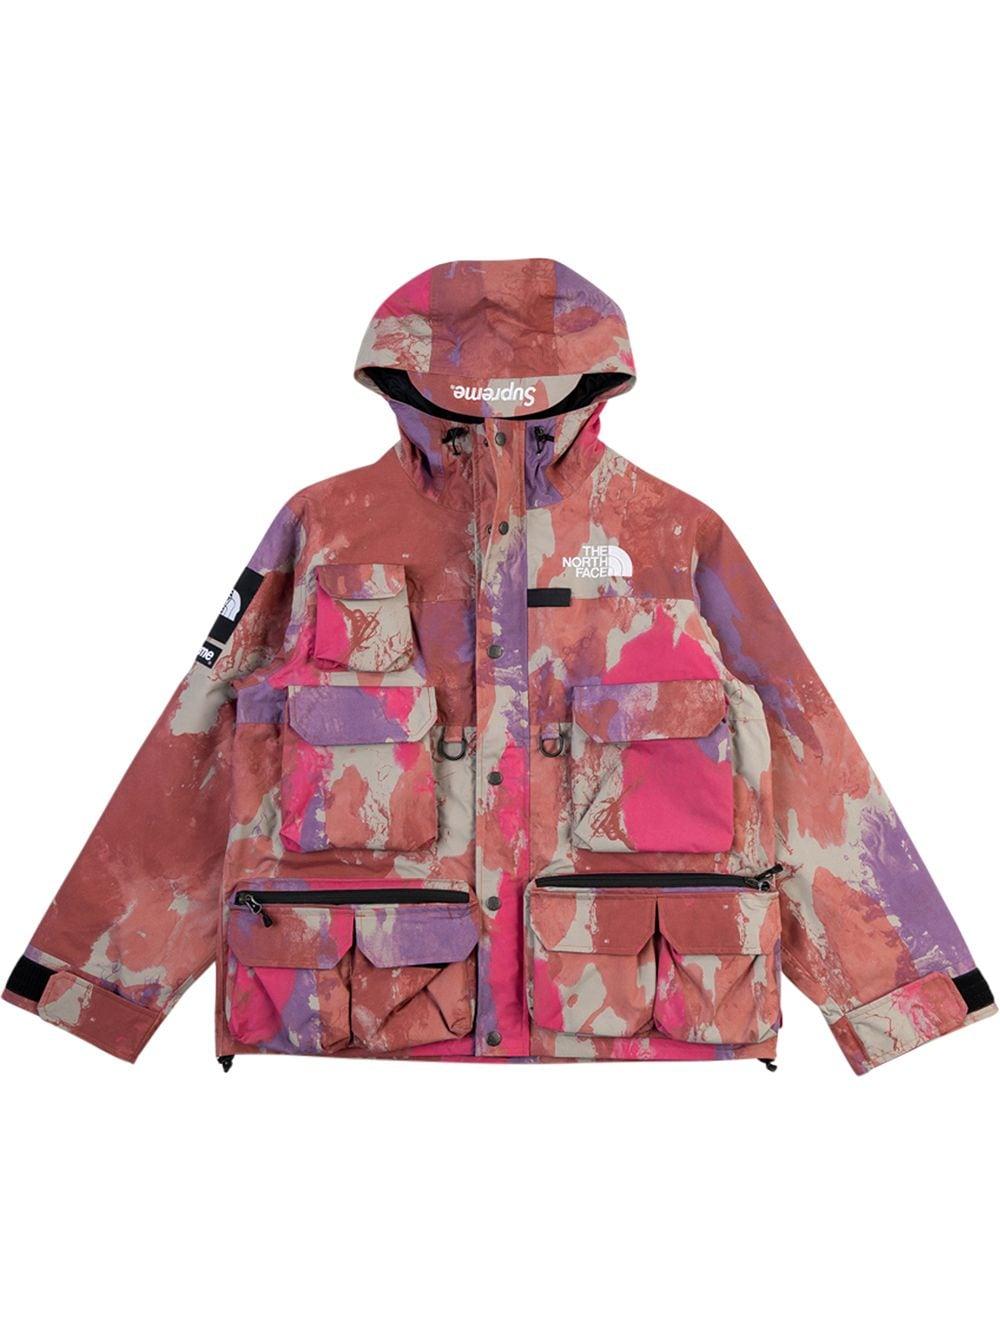 Supreme X The North Face Cargo Jacket in Pink for Men - Lyst